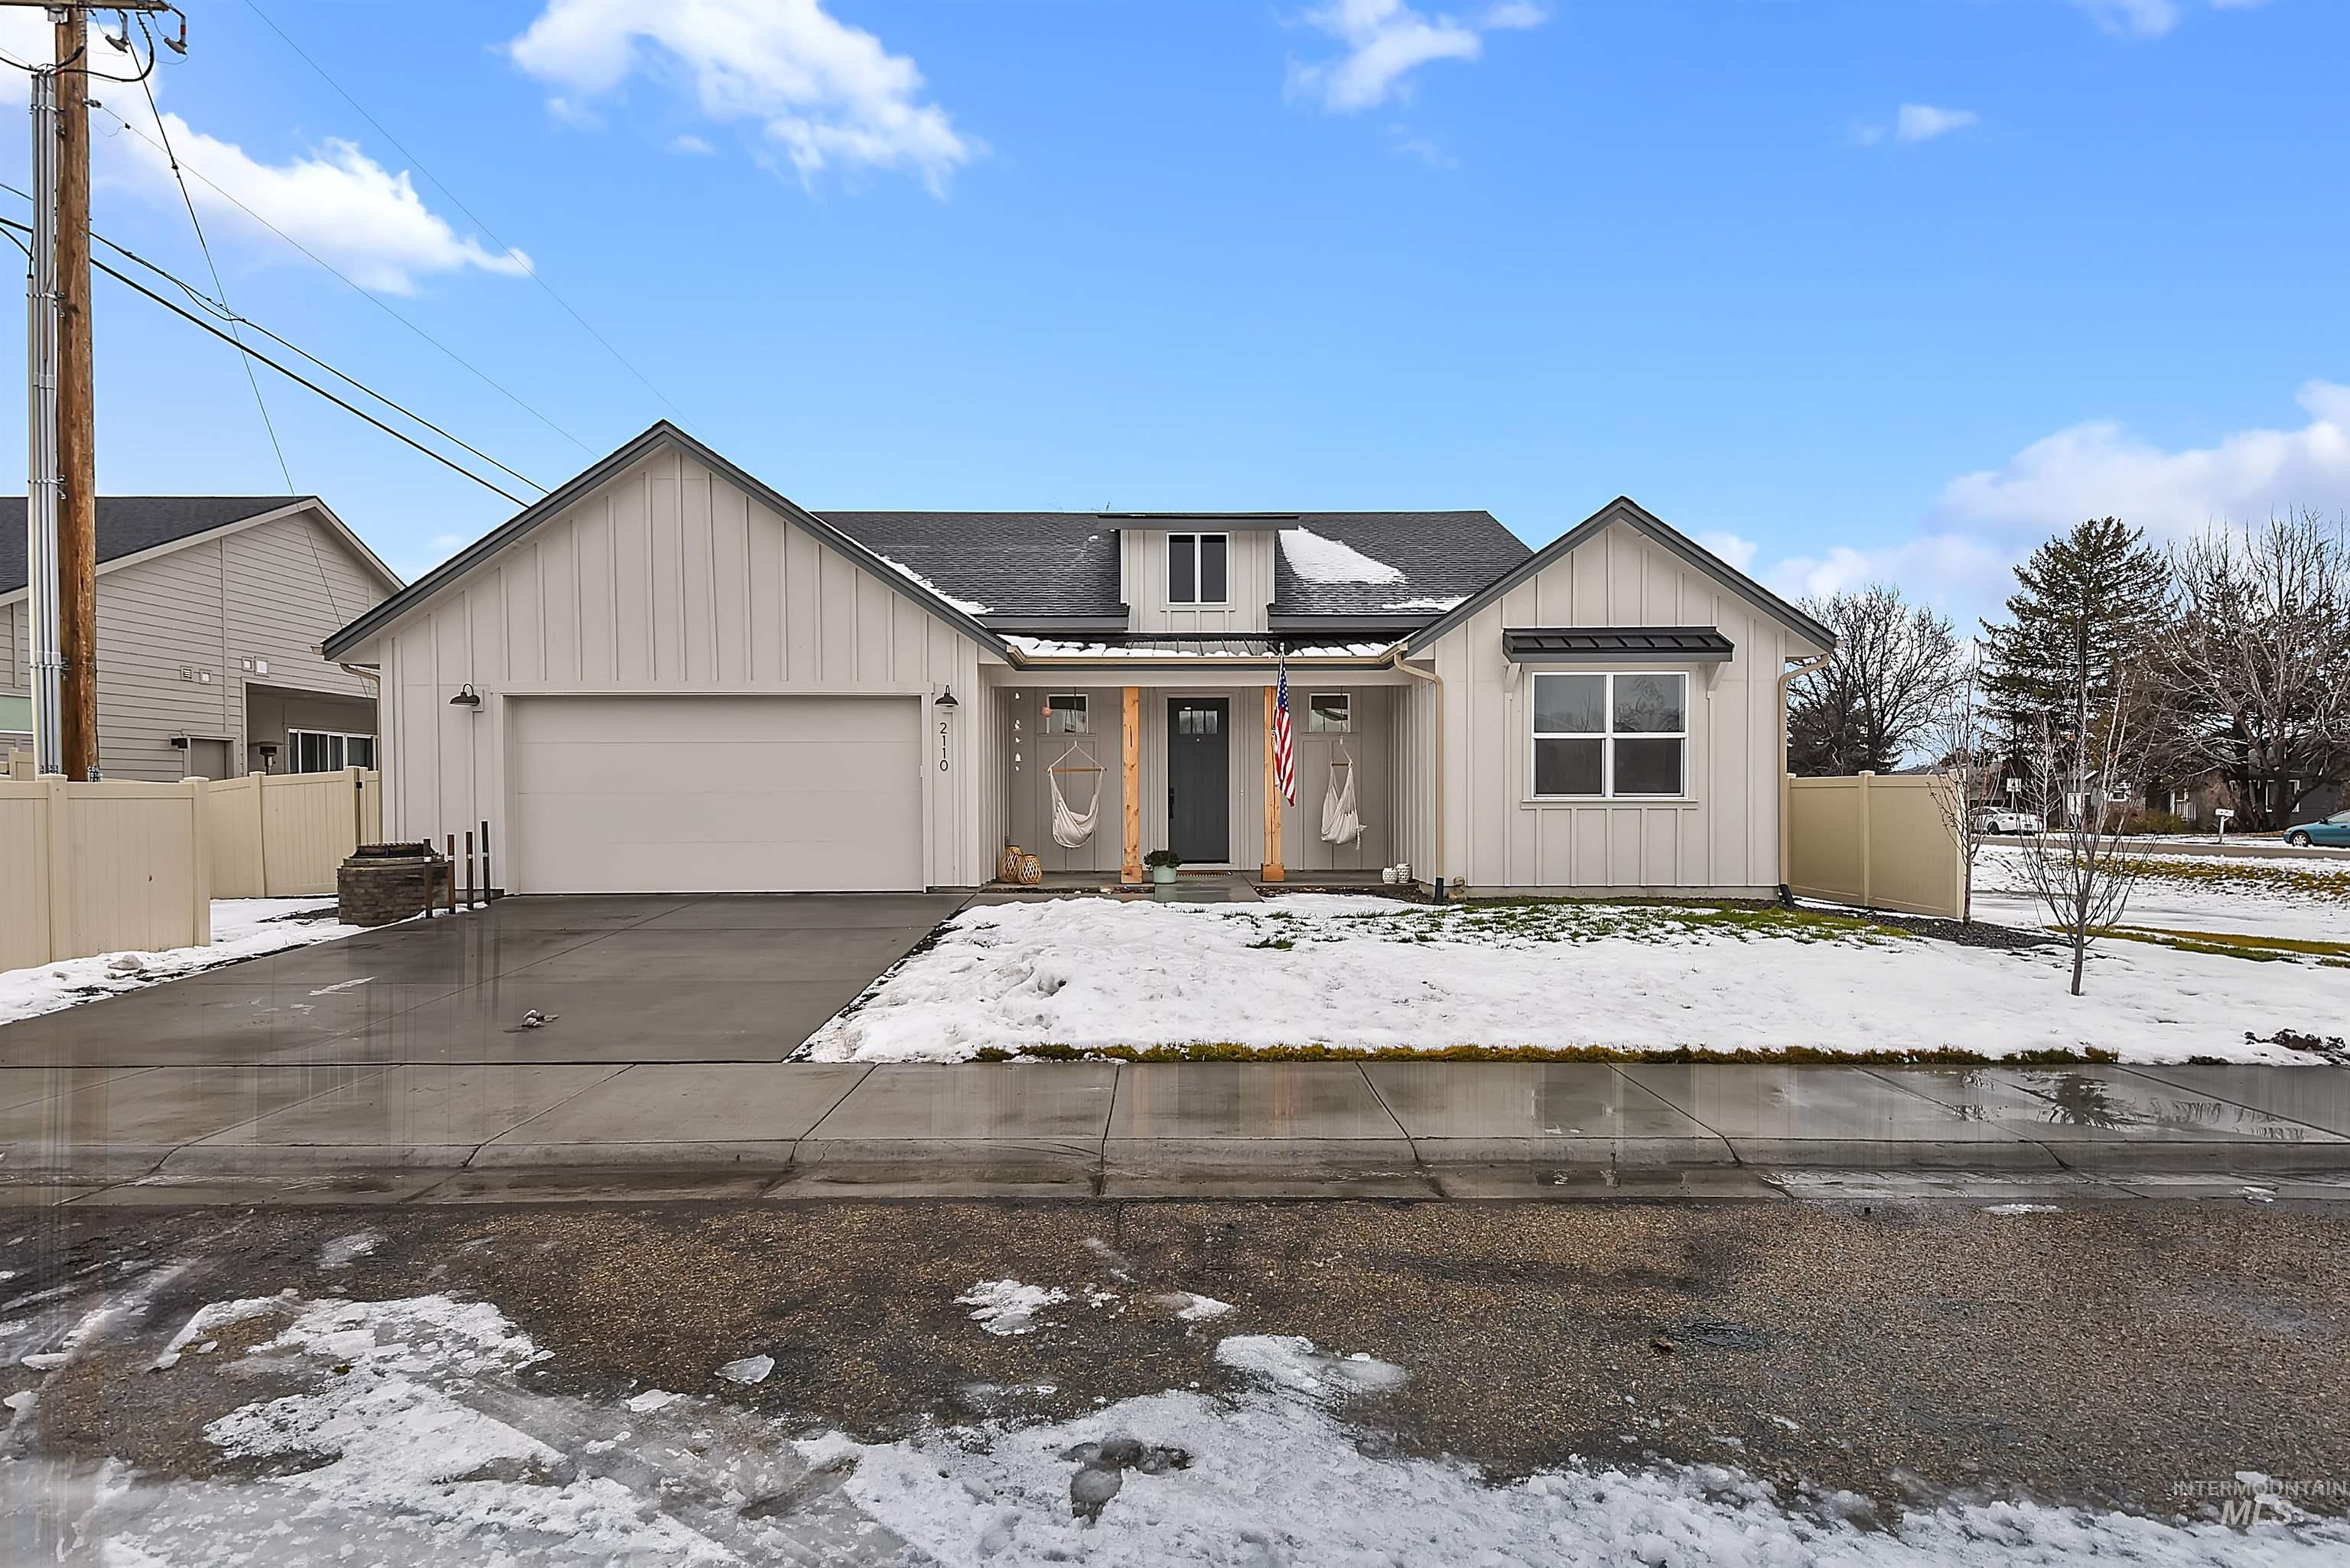 2110 Sunset Ave., Caldwell, ID 83605